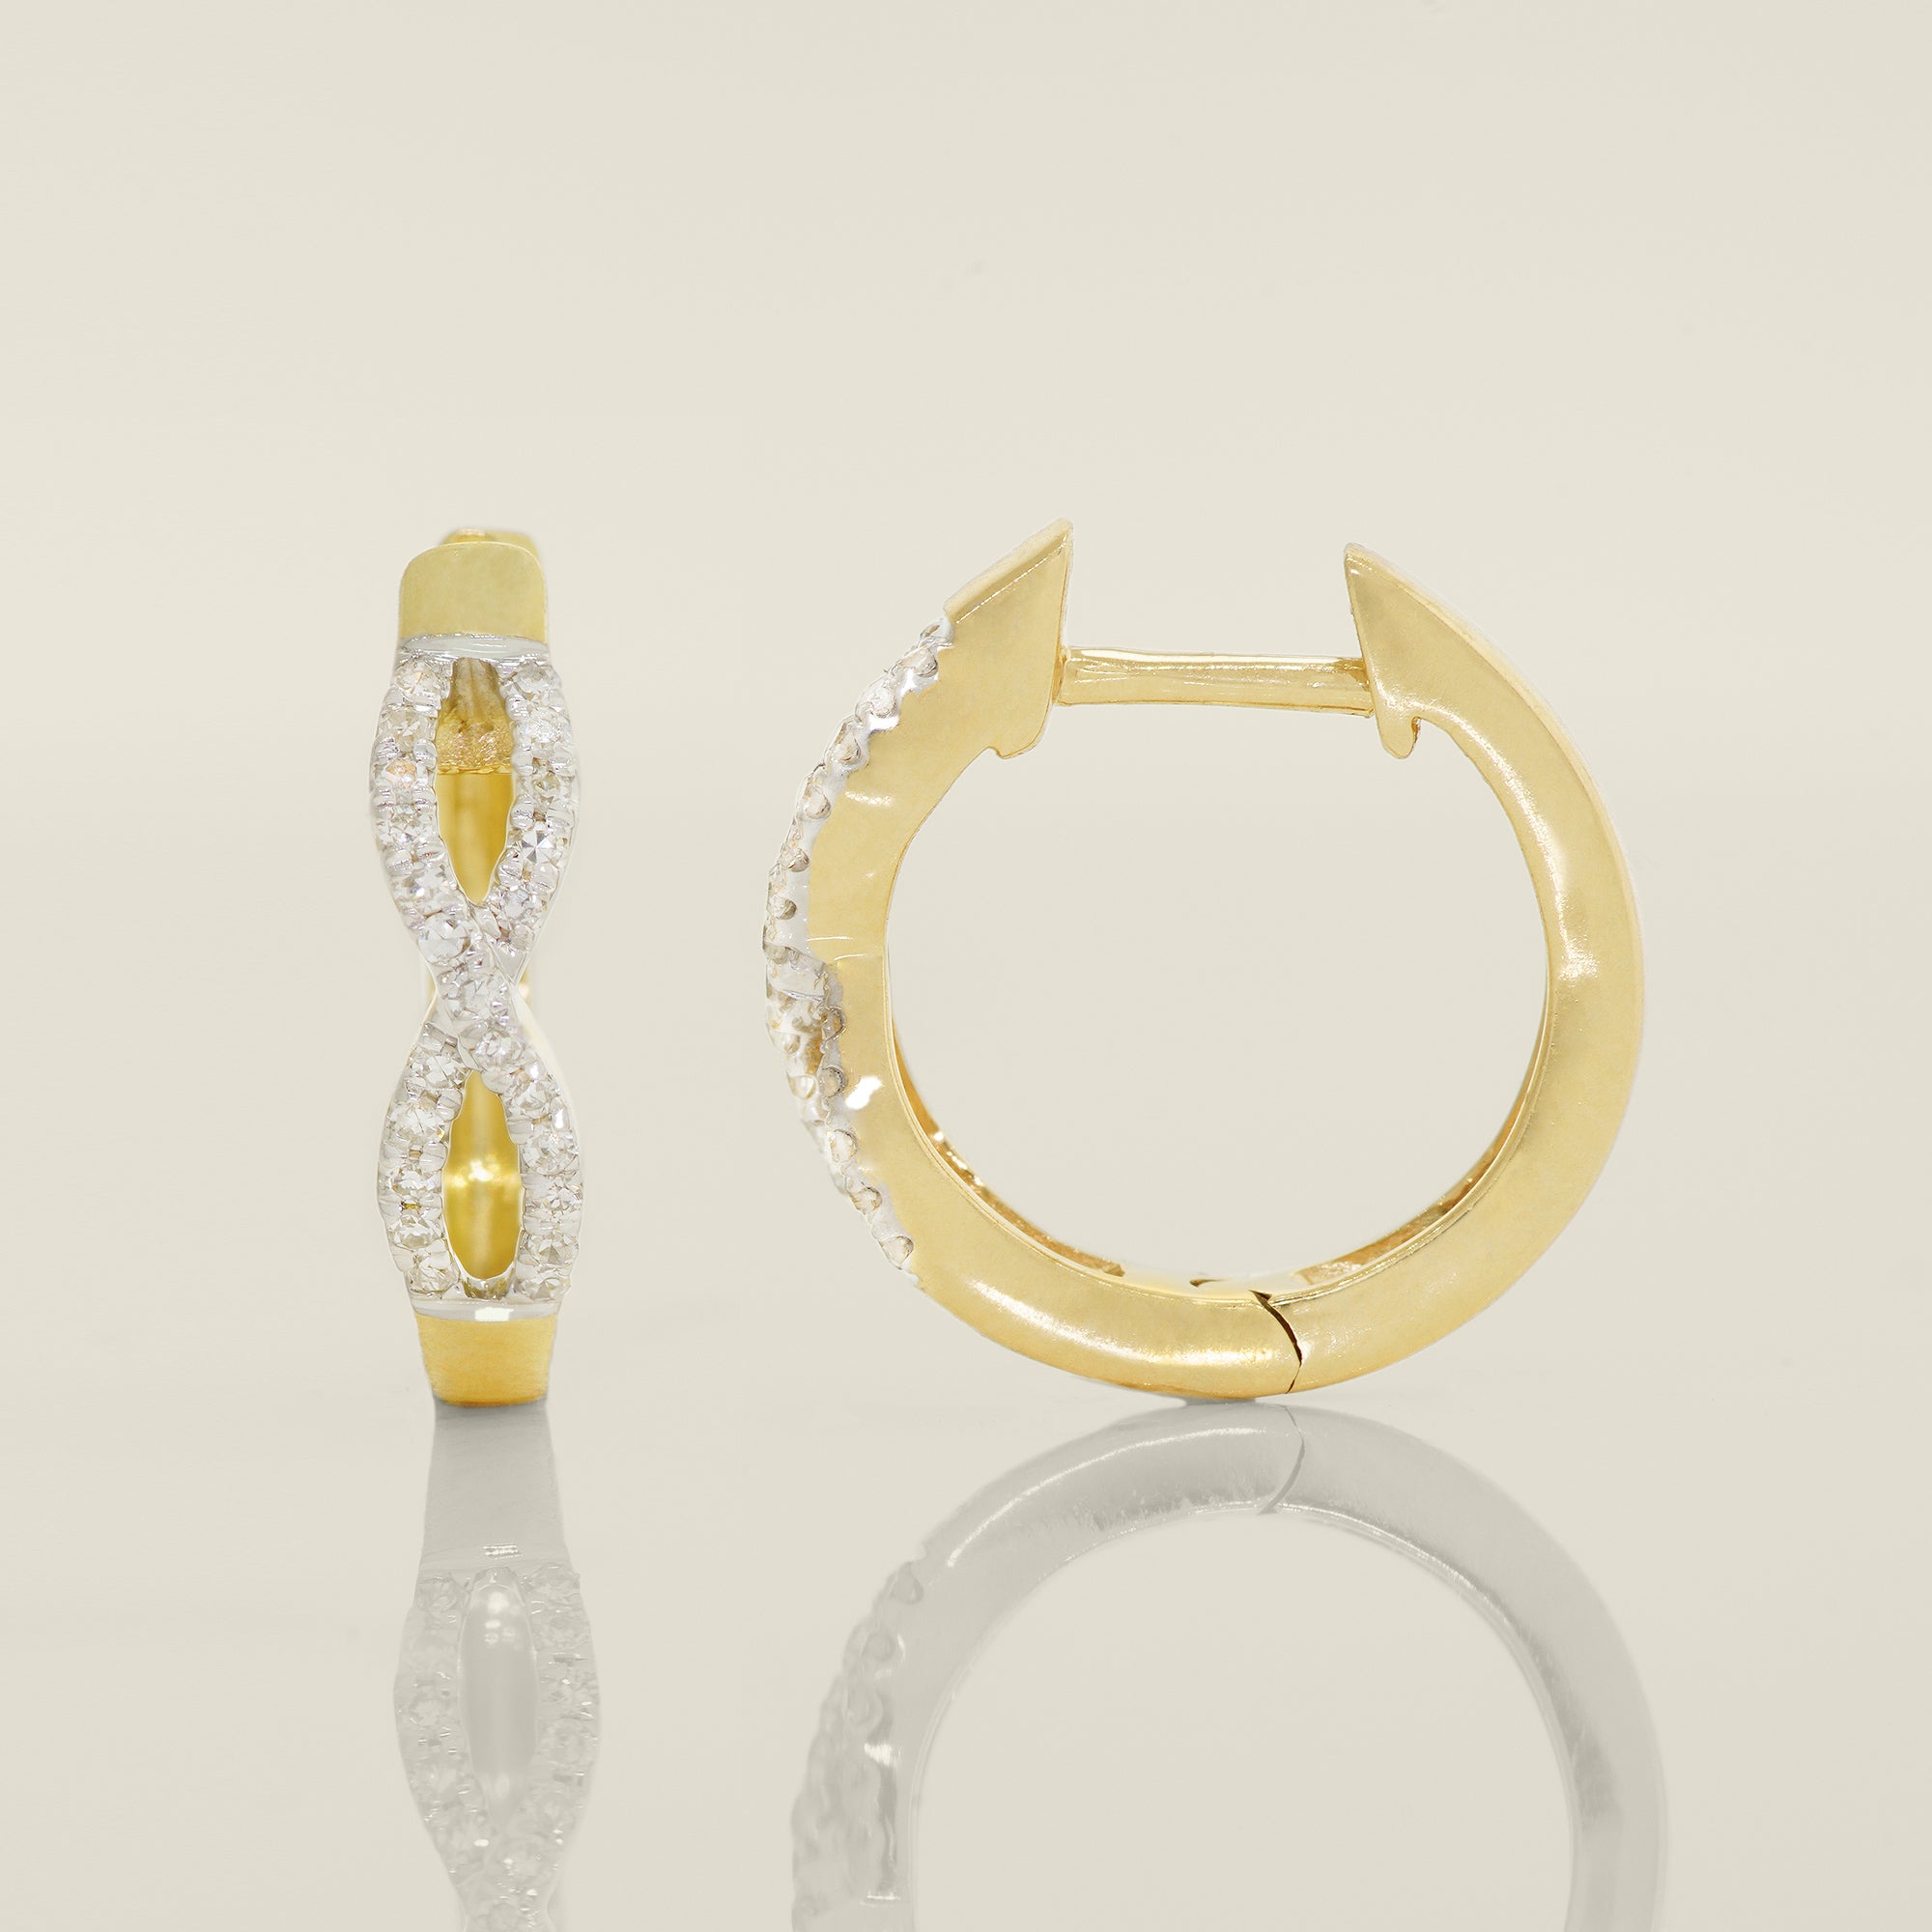 14K Solid Gold 0.14ctw Diamond Infinity Hoop Earrings - Anygolds